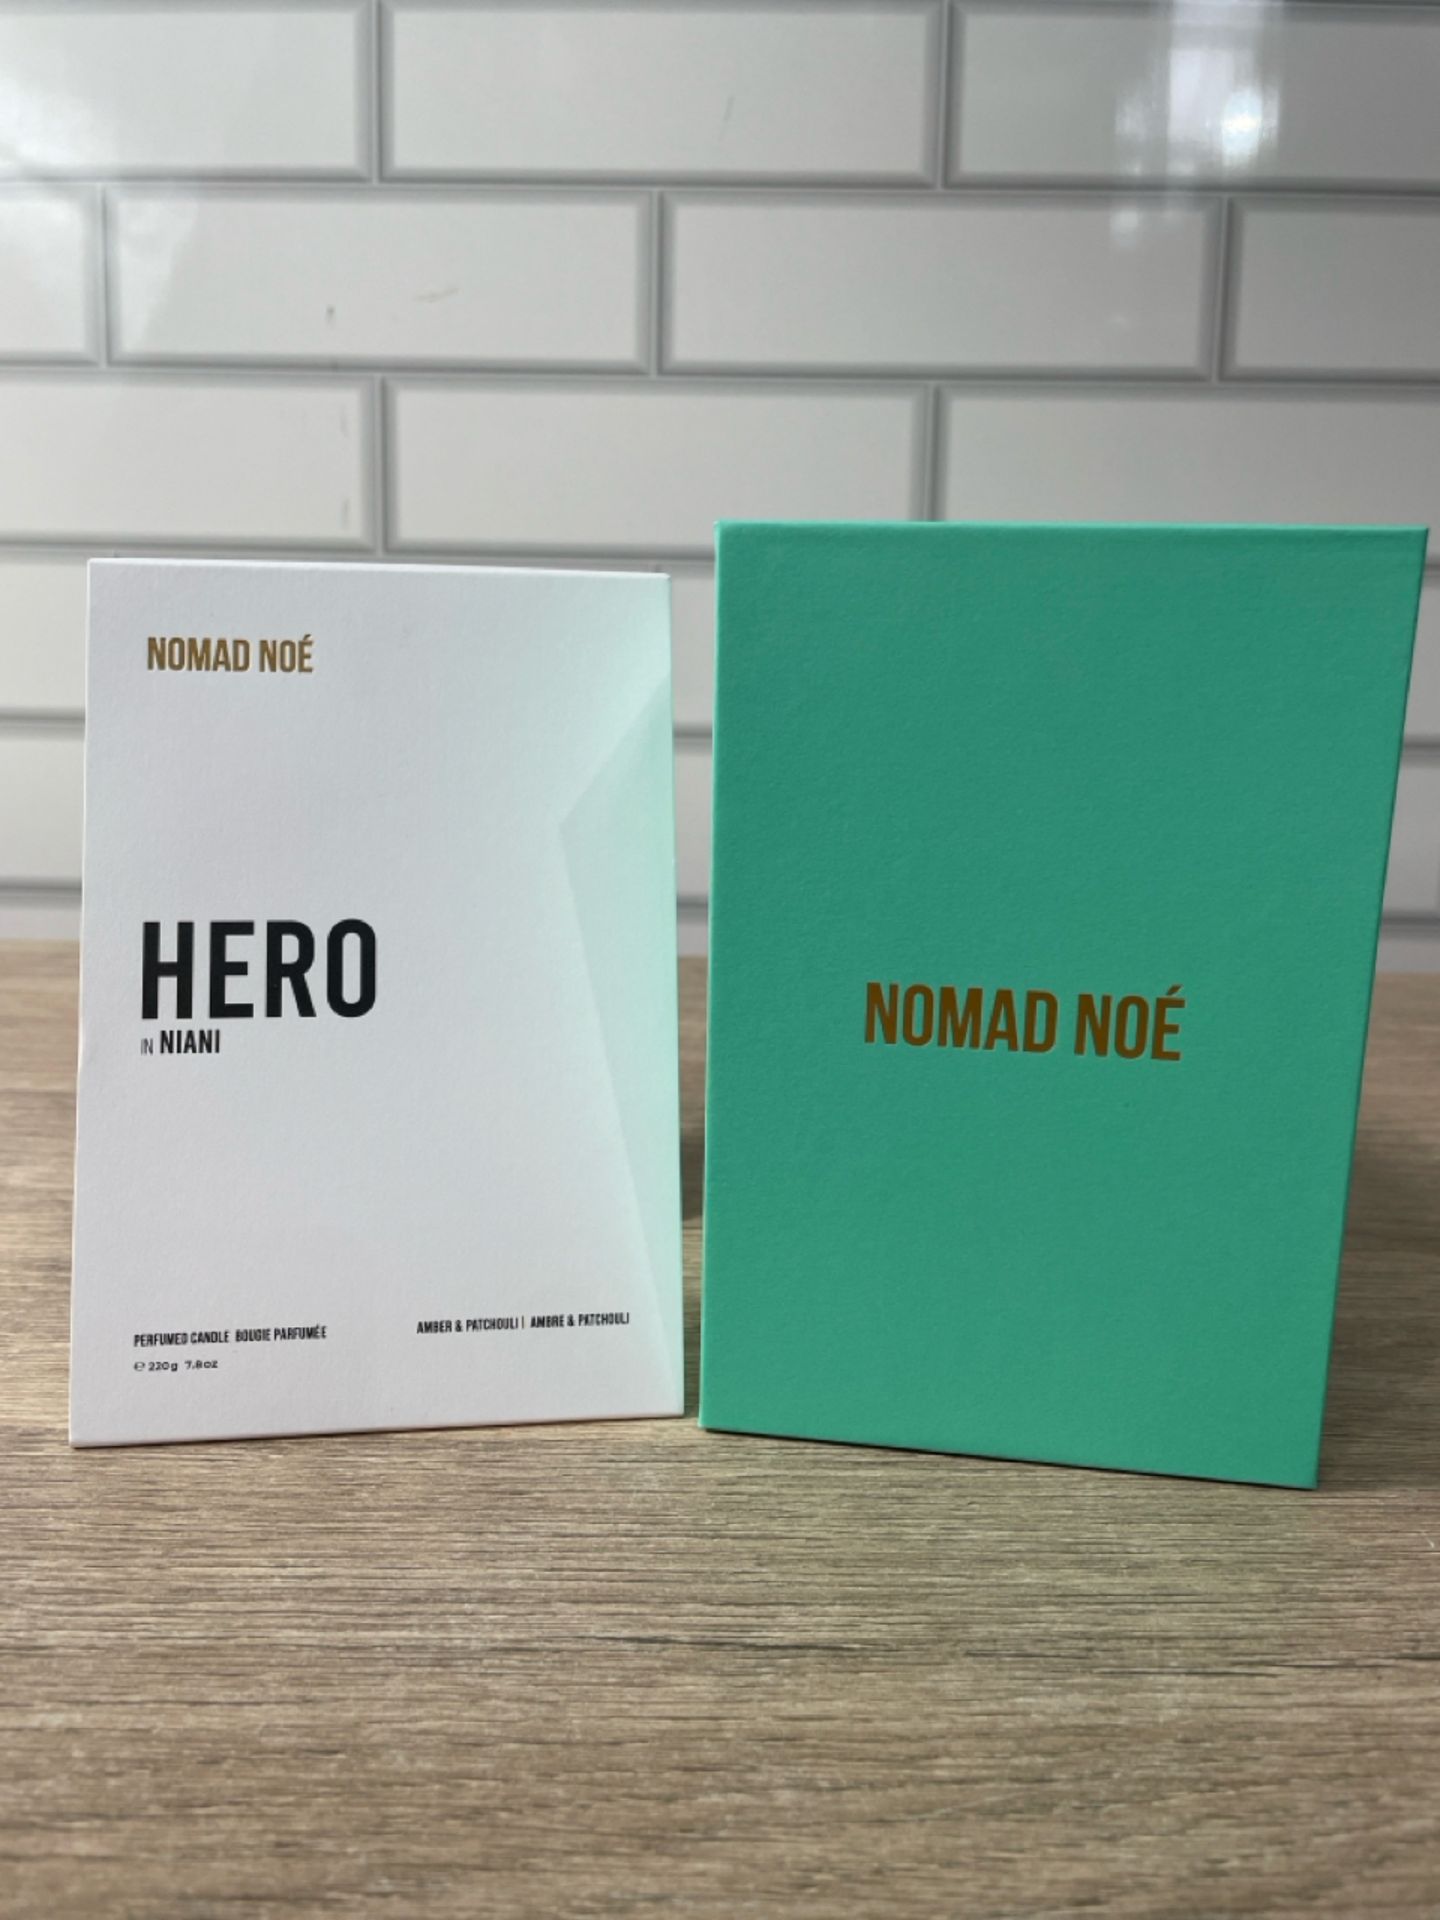 Hero Scented Candle from Nomad Noe - Image 2 of 5